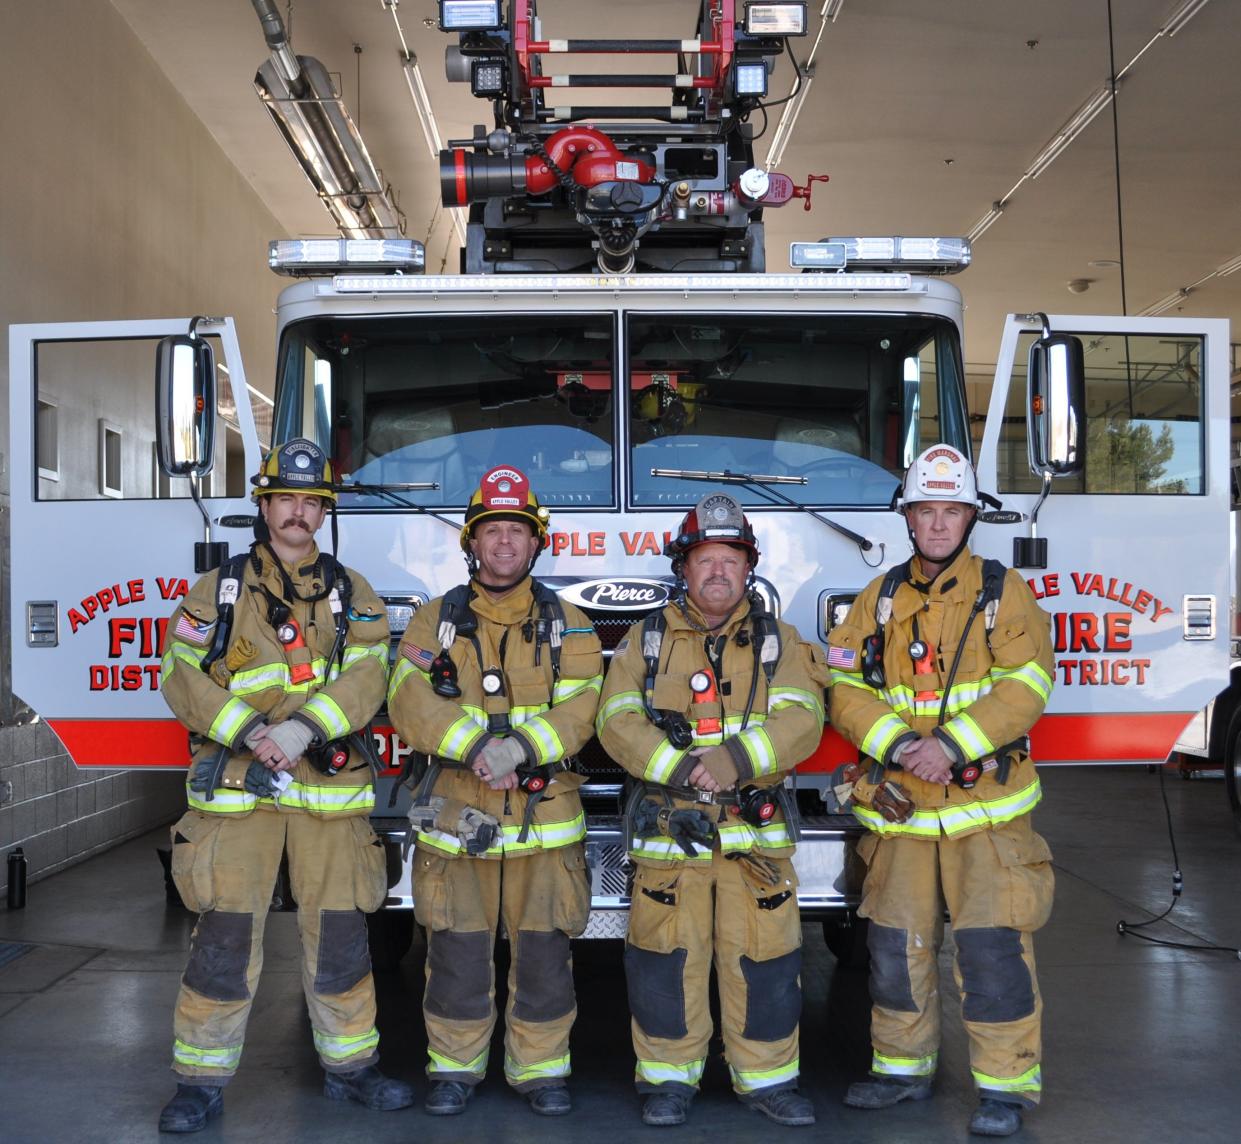 Apple Valley Fire Protection District personnel plan to climb nearly 70 floors of the Columbia Center skyscraper in Seattle in March during the 32nd  annual Leukemia & Lymphoma Society Firefighter Stairclimb fundraiser. Pictured left to right, firefighter Corey Fratt, firefighter and District Stair Climb Team Captain David Martinez, Fire Captain John Watterson and Fire Marshal Brian Pachman.